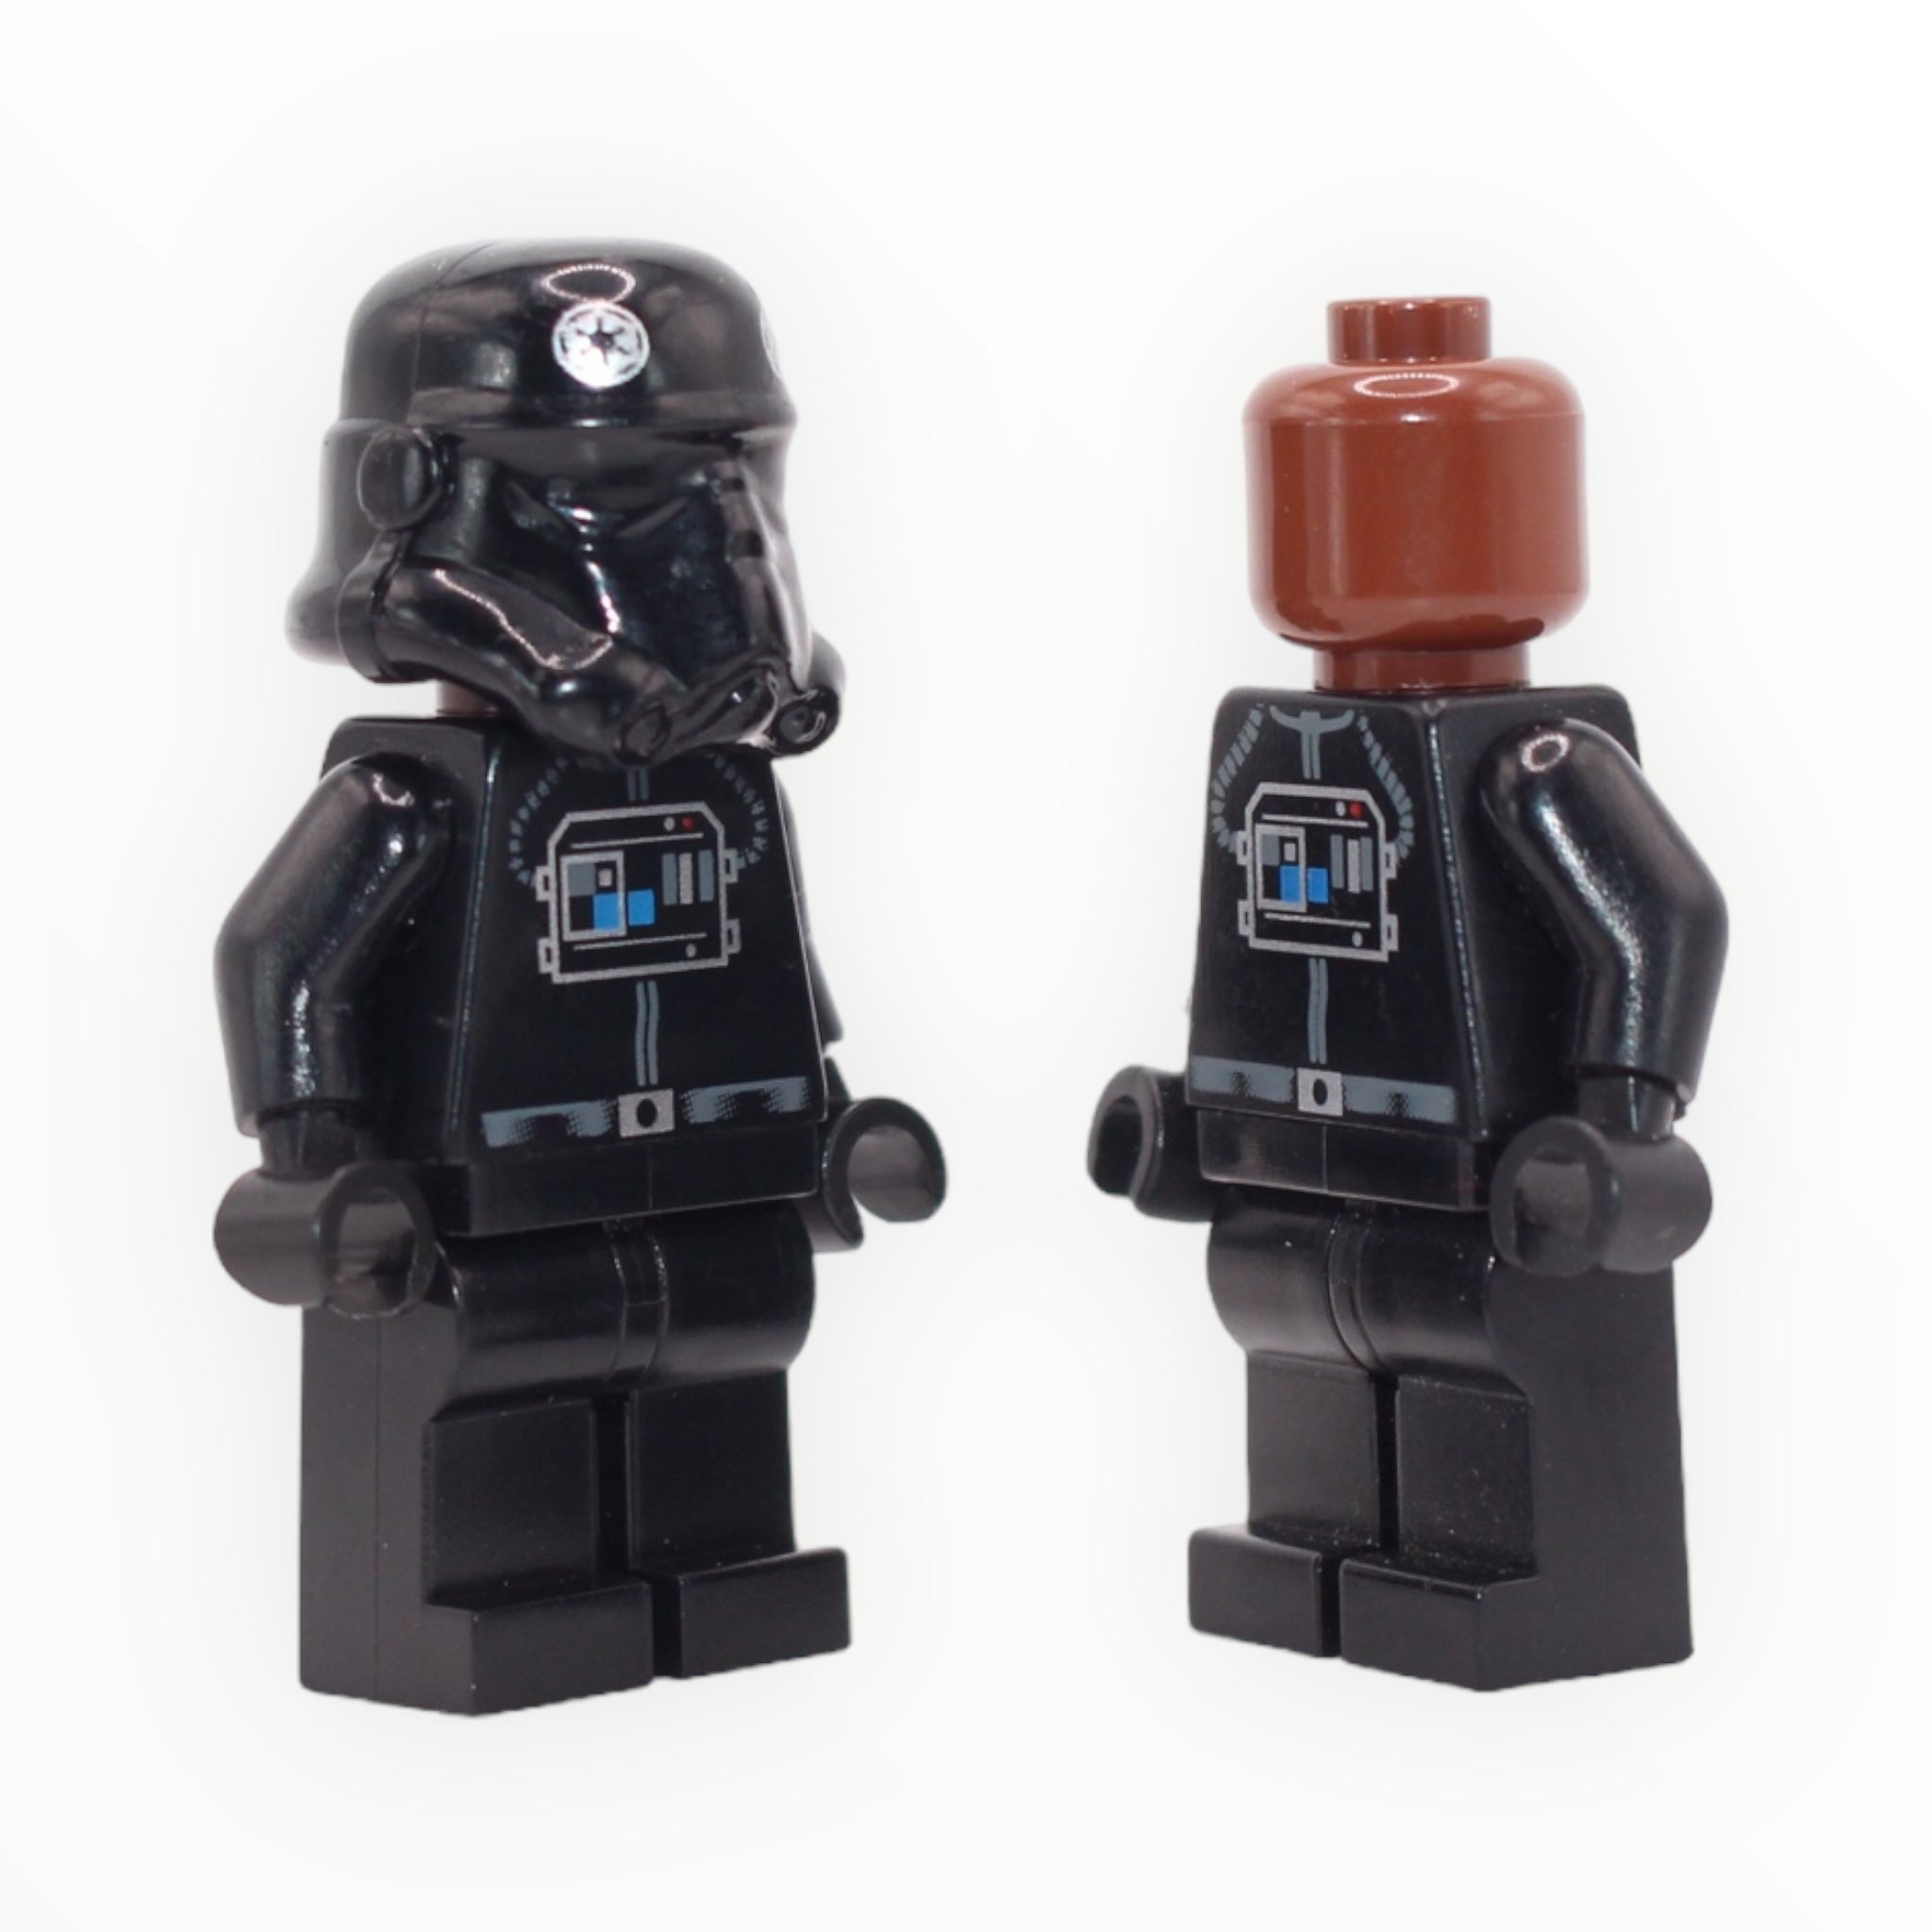 Imperial TIE Fighter Pilot (all black helmet with insignias, reddish brown head, 2004)